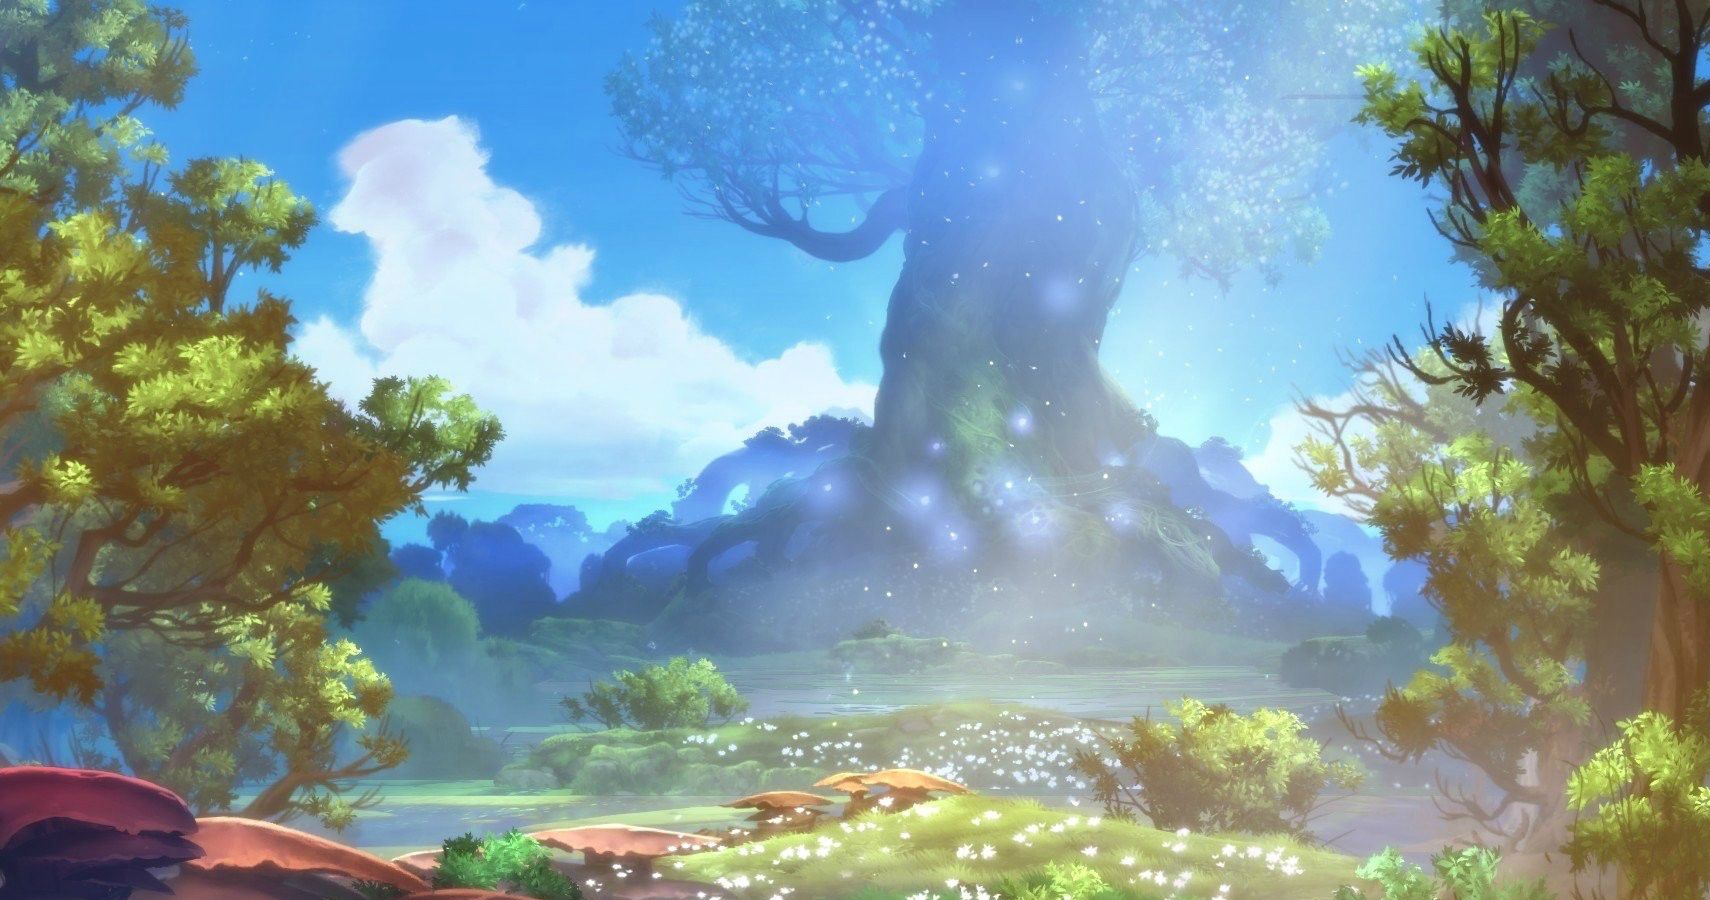 Airborn Studios Work in Ori and the Blind Forest